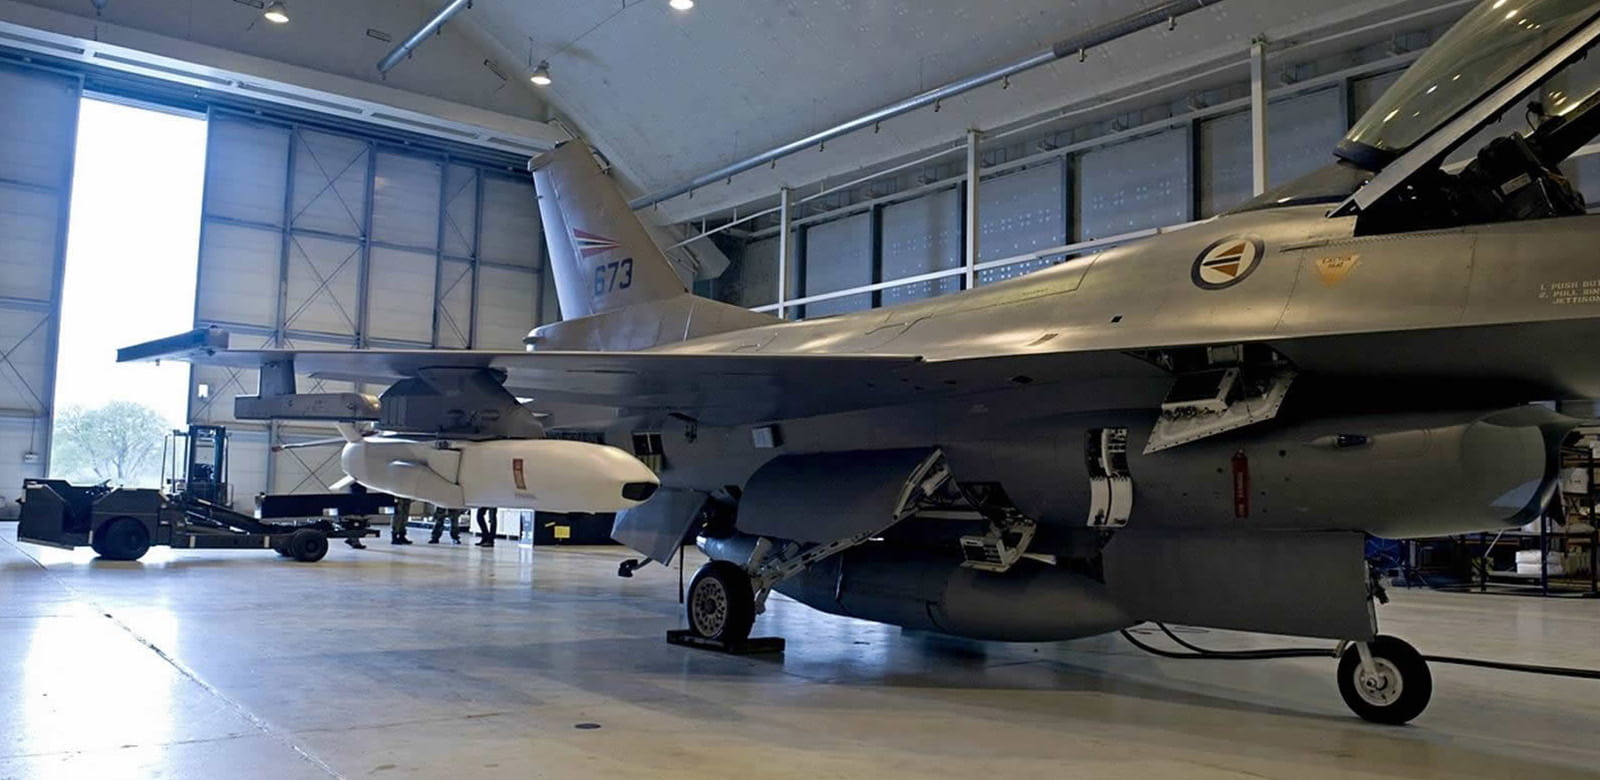 A Joint Strike Missile is pictured on the wing of a Royal Norwegian Air Force F-16 during a fit check.